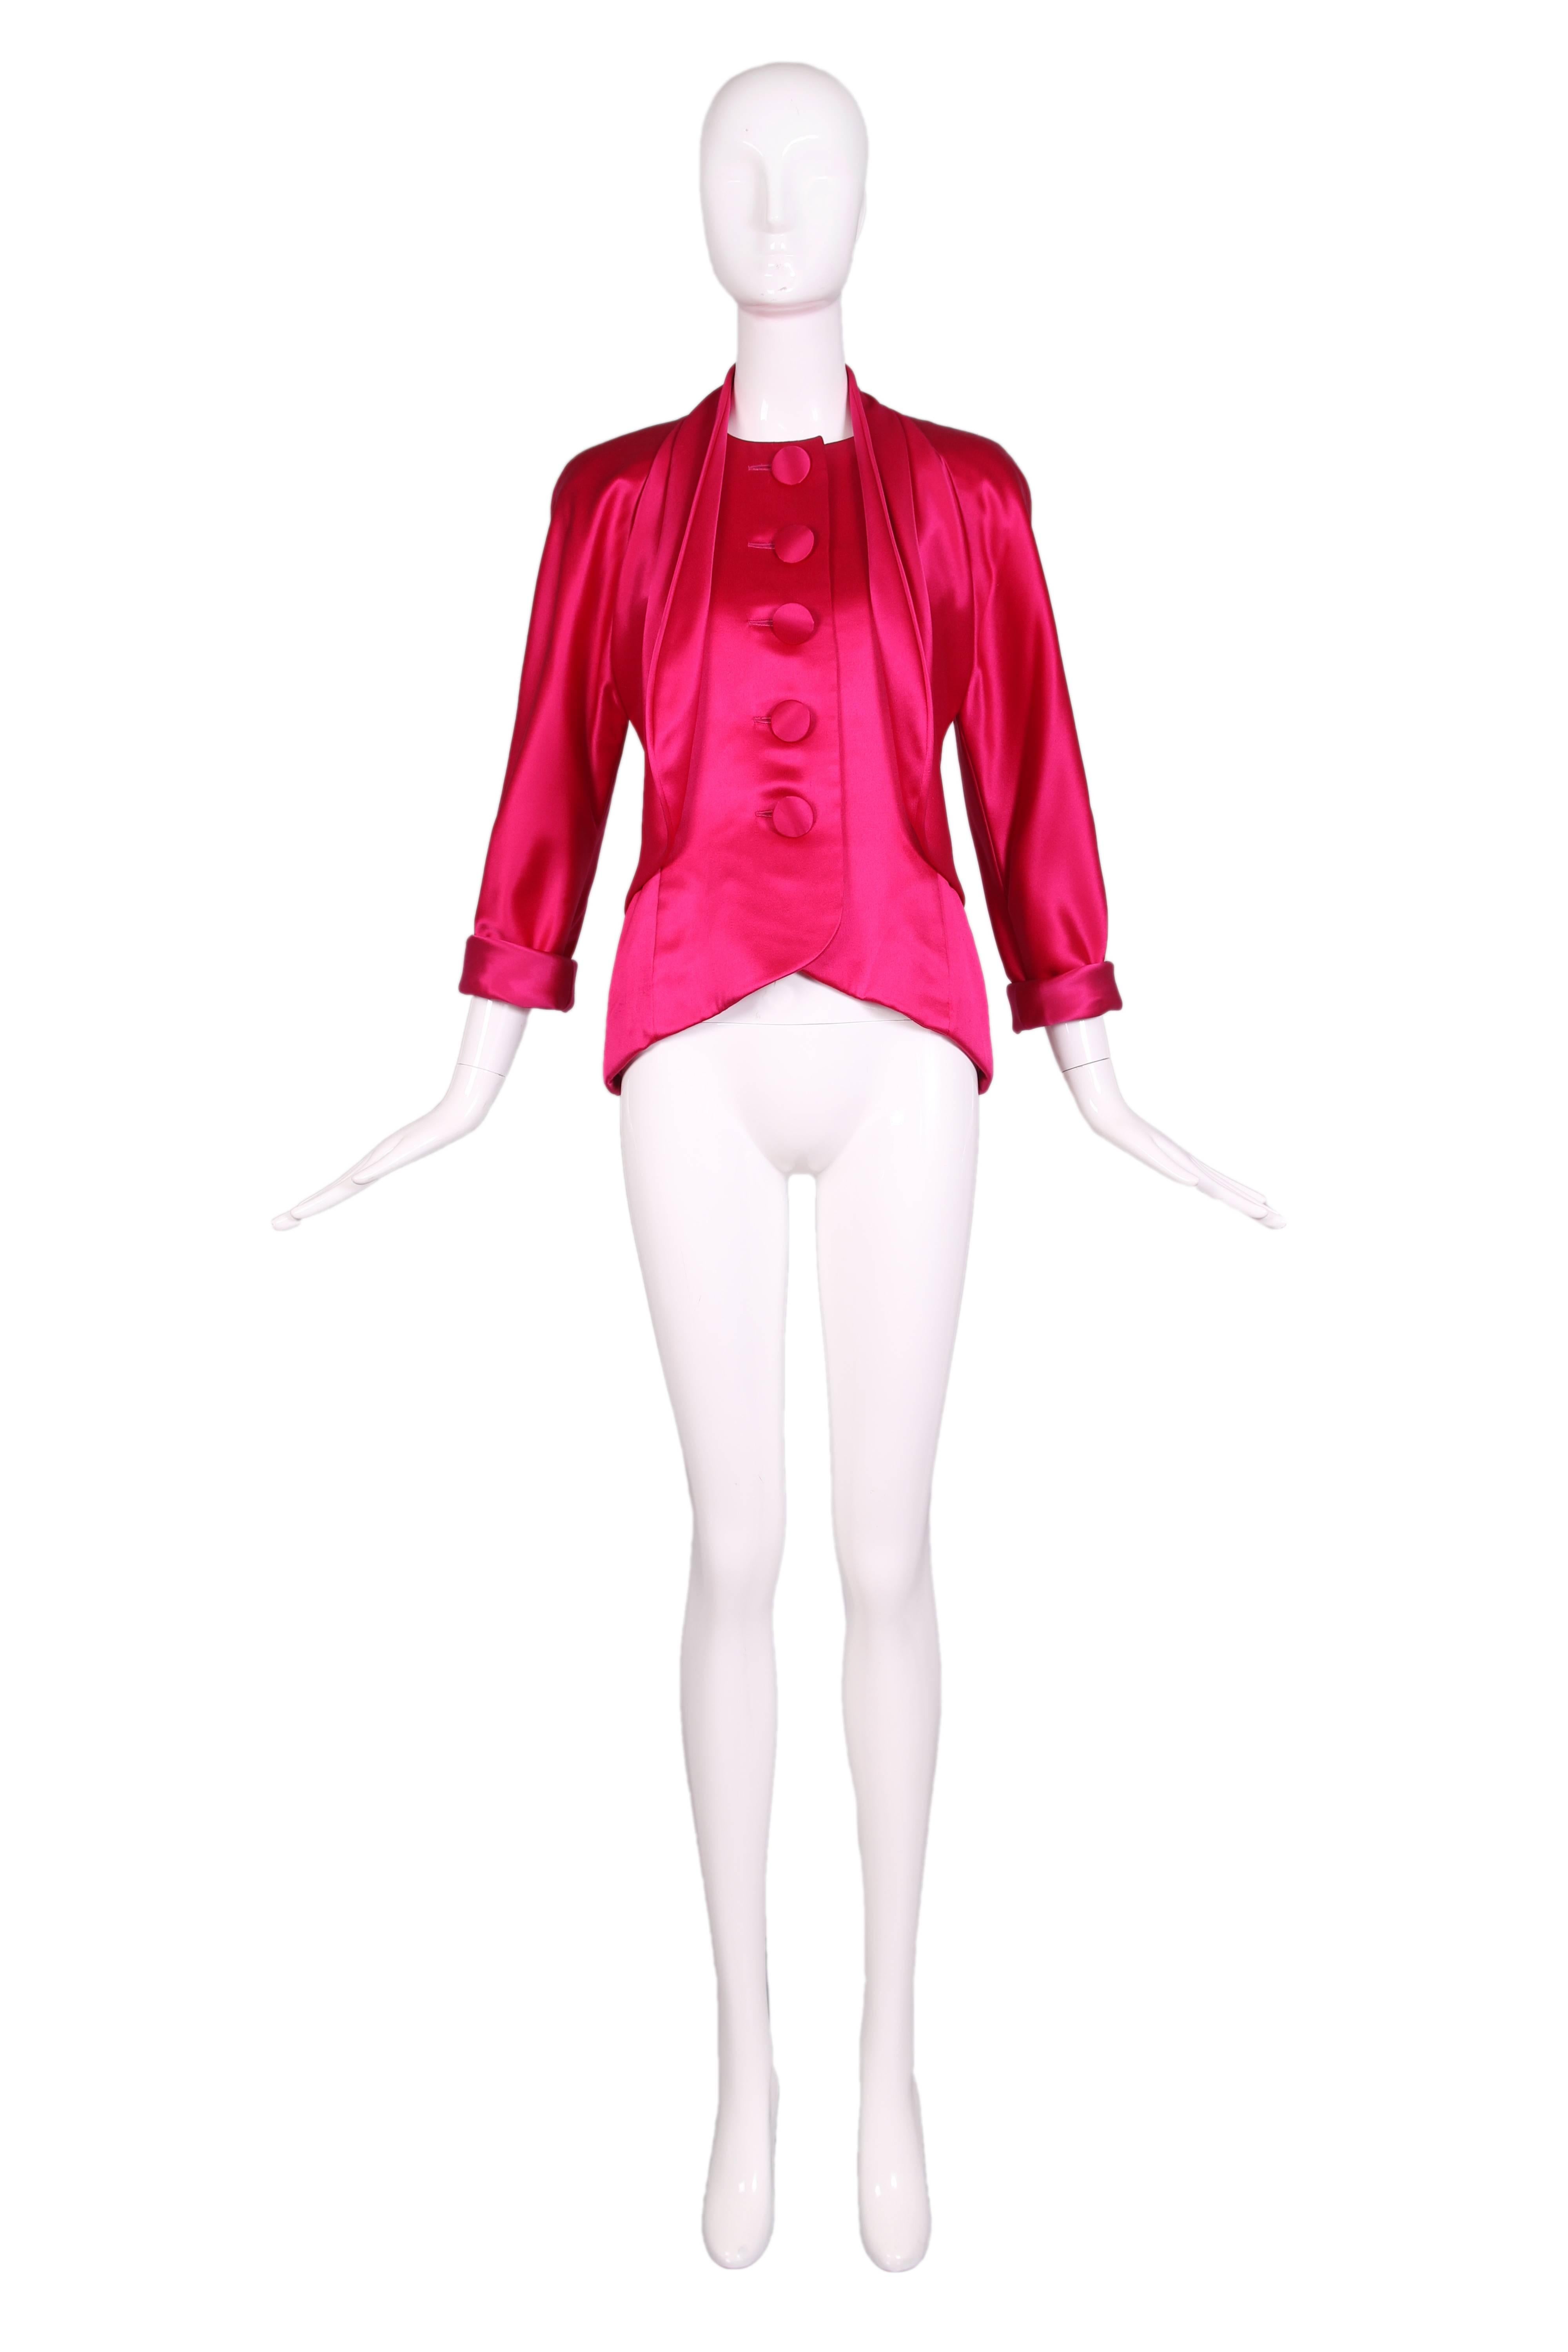 Vintage Galanos hot pink satin jacket blouse with subtle tulip hem, over-sized fabric buttons down the front and cuff sleeves.  In excellent condition with tiny scattered pulls and abrasions which is the nature of this fabric.
MEASUREMENTS (in